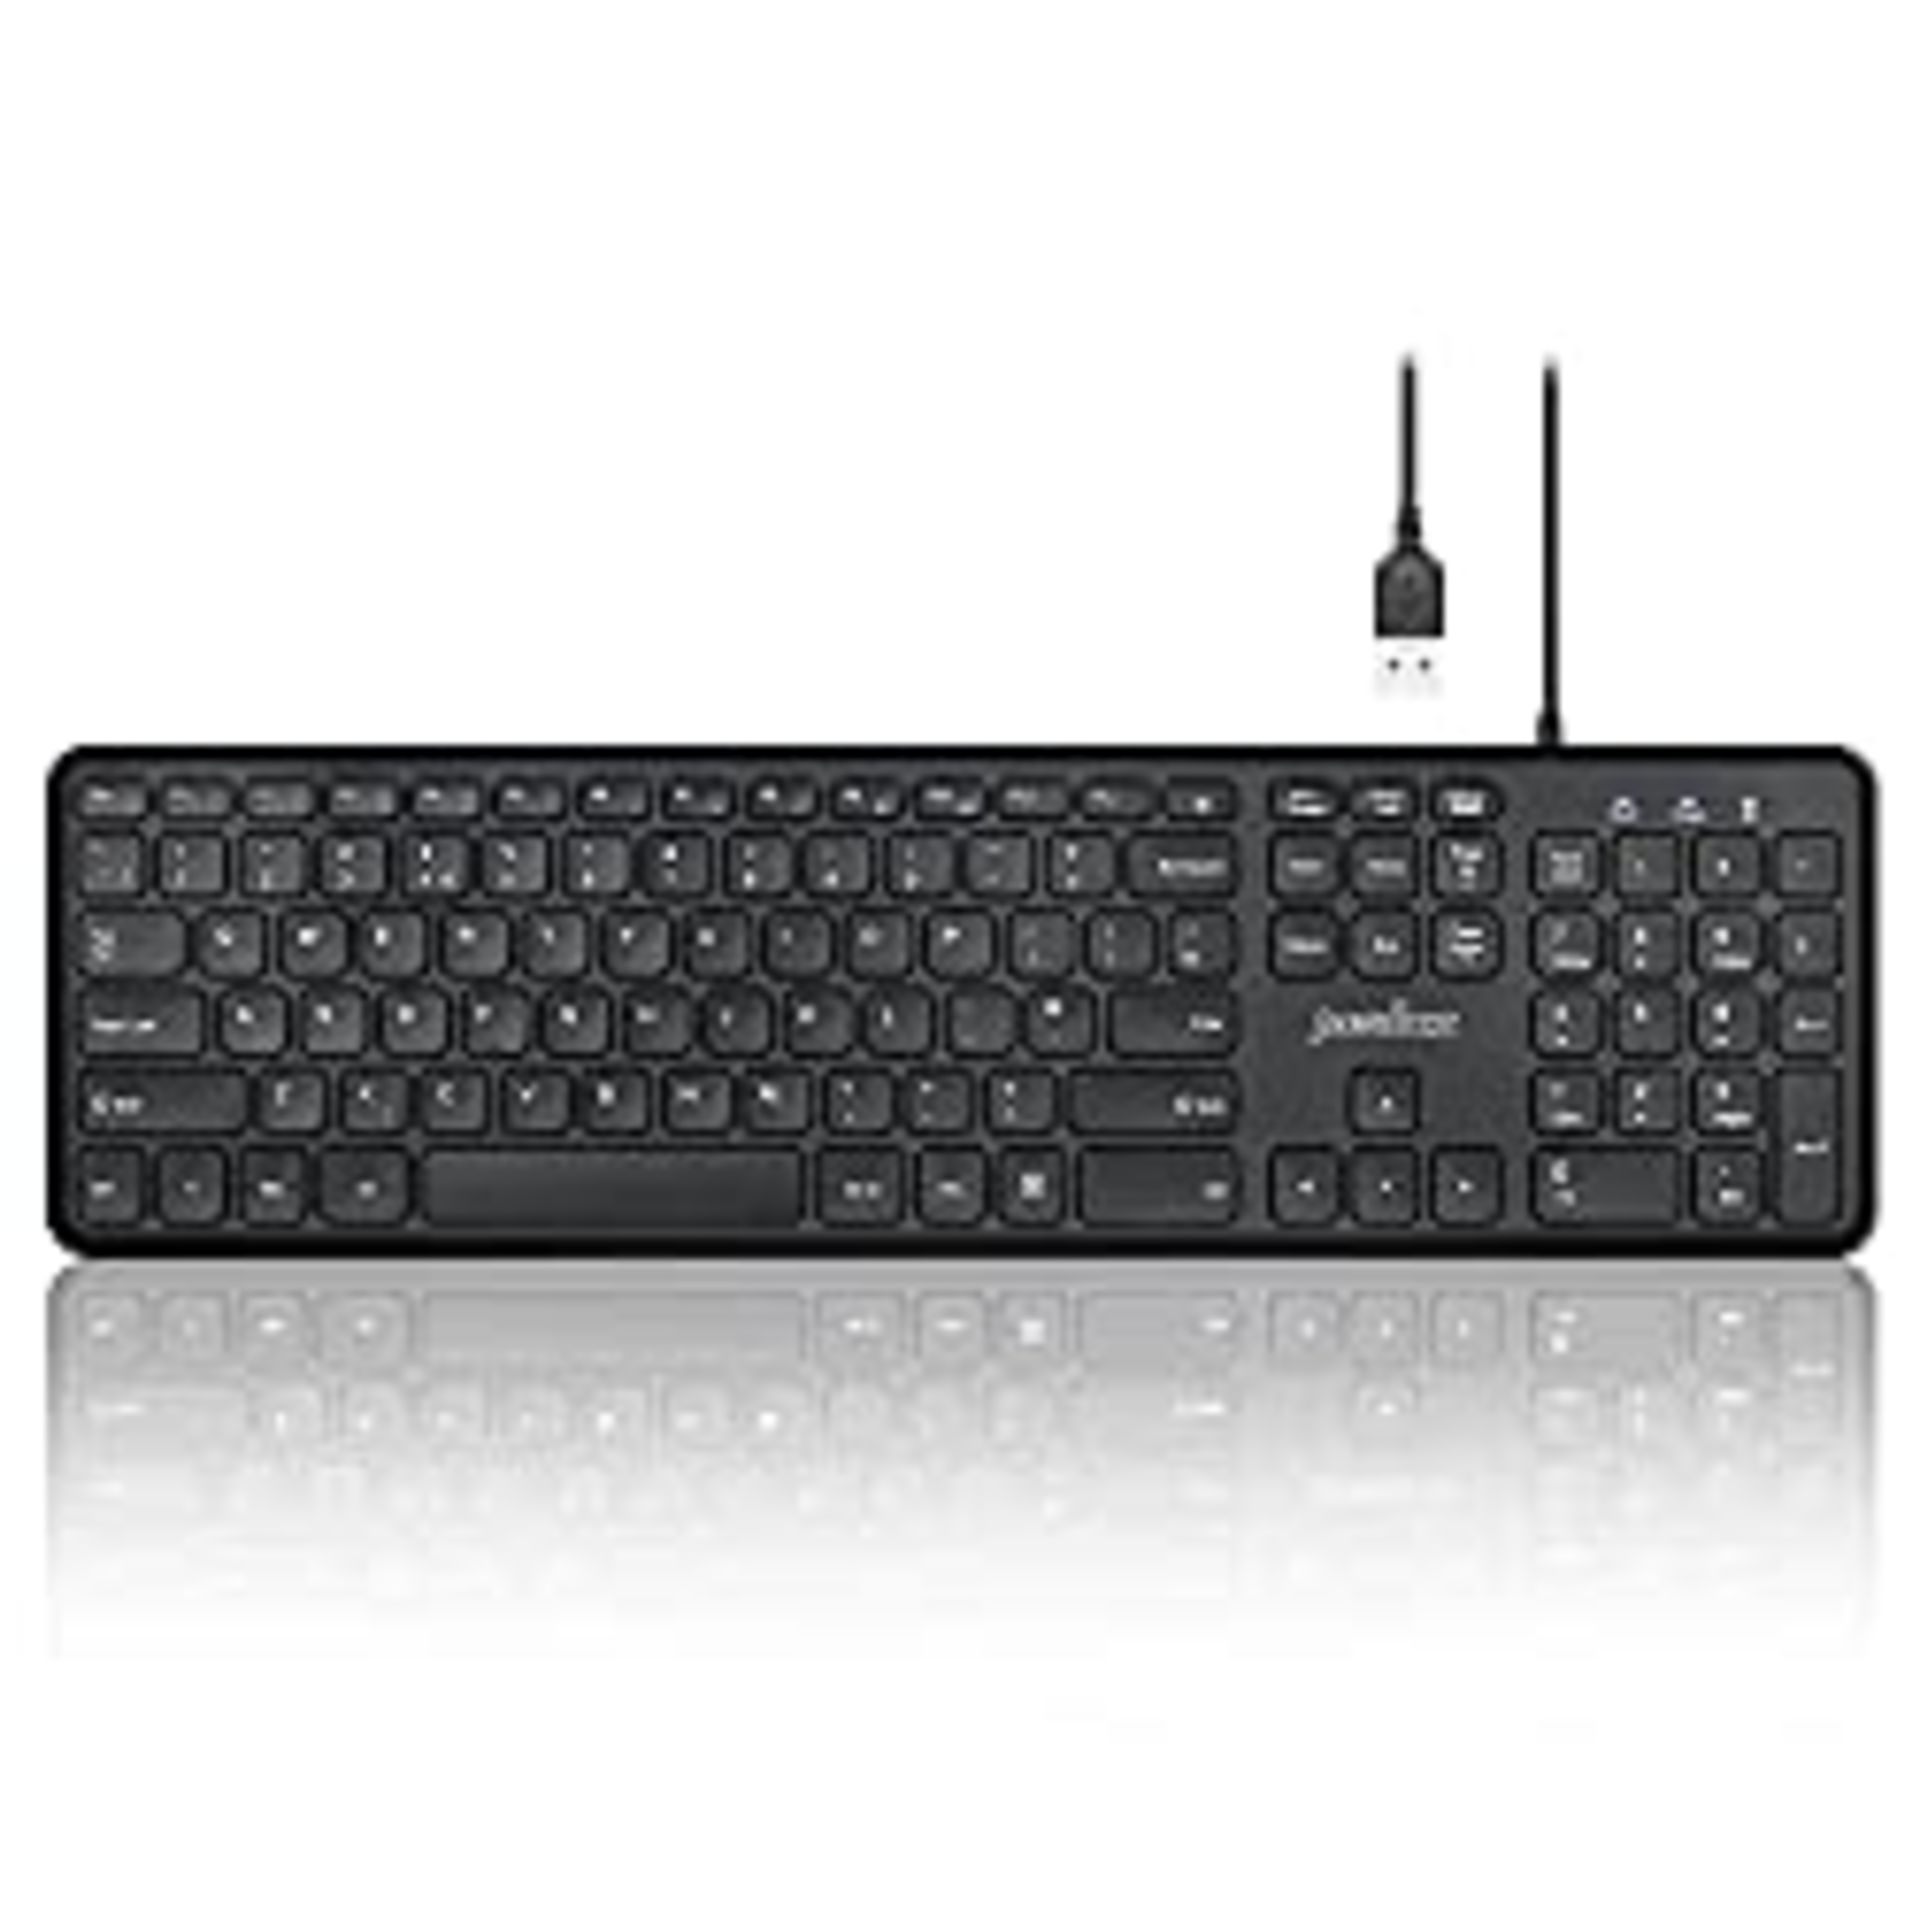 RRP £17.99 Perixx PERIBOARD-210 Wired Full-Size Keyboard with